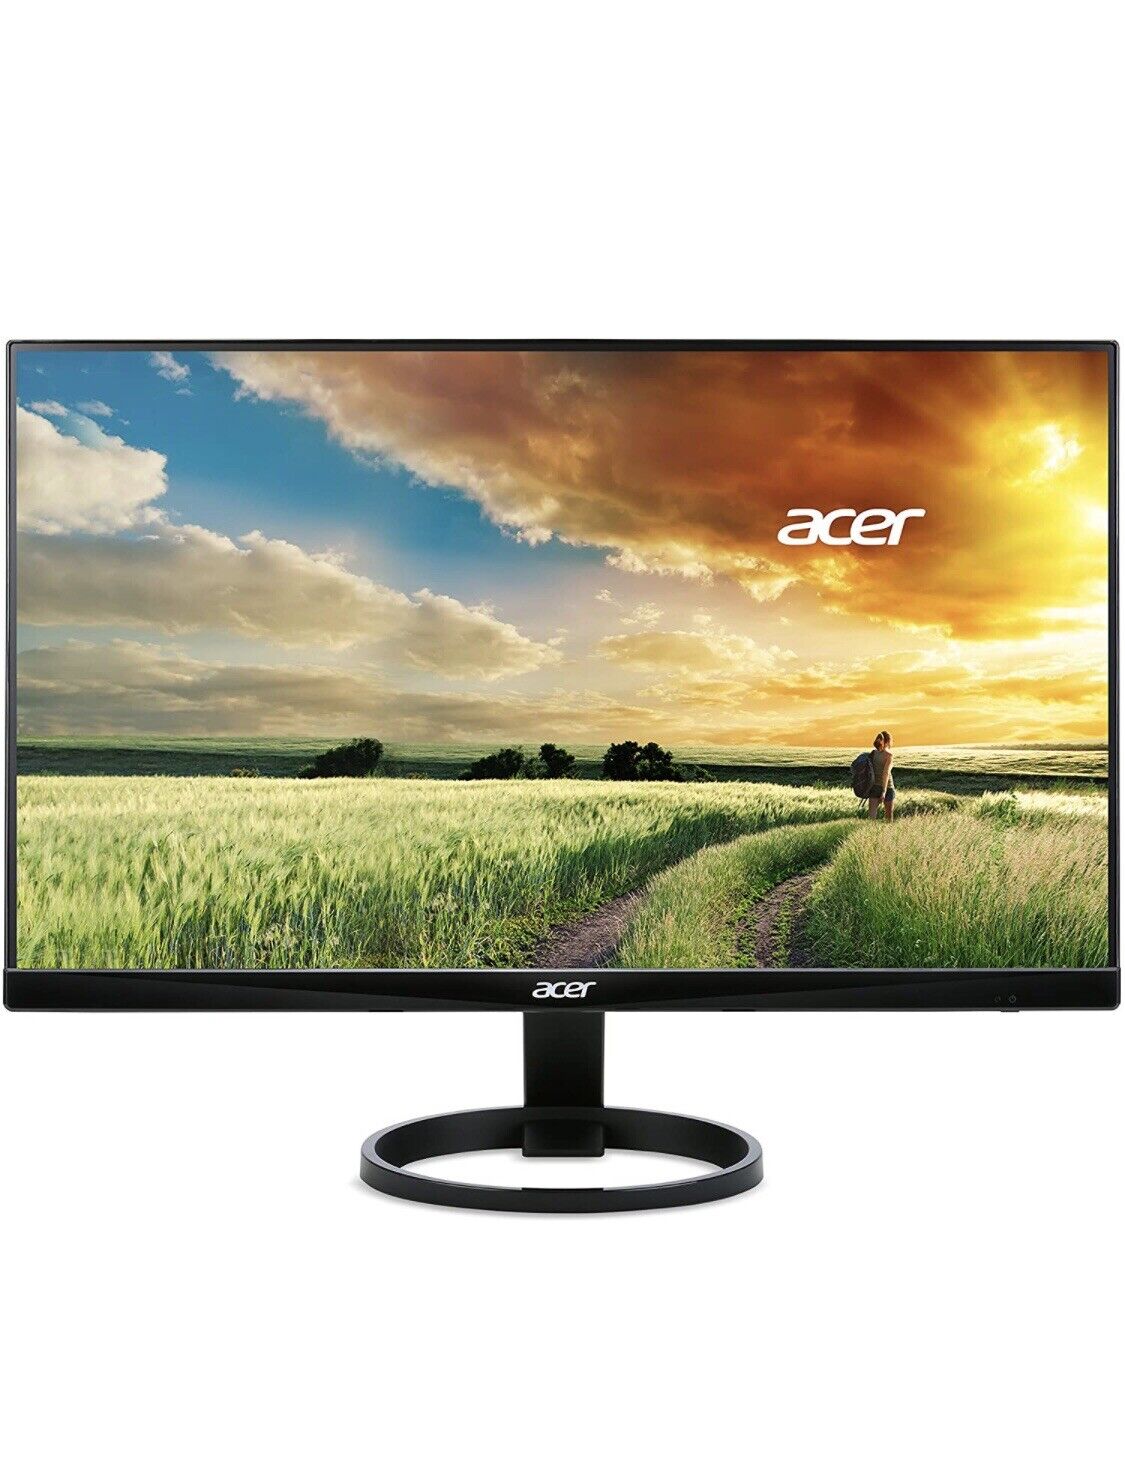 Acer R240HY bidx 23.8 inch Widescreen IPS LCD Monitor